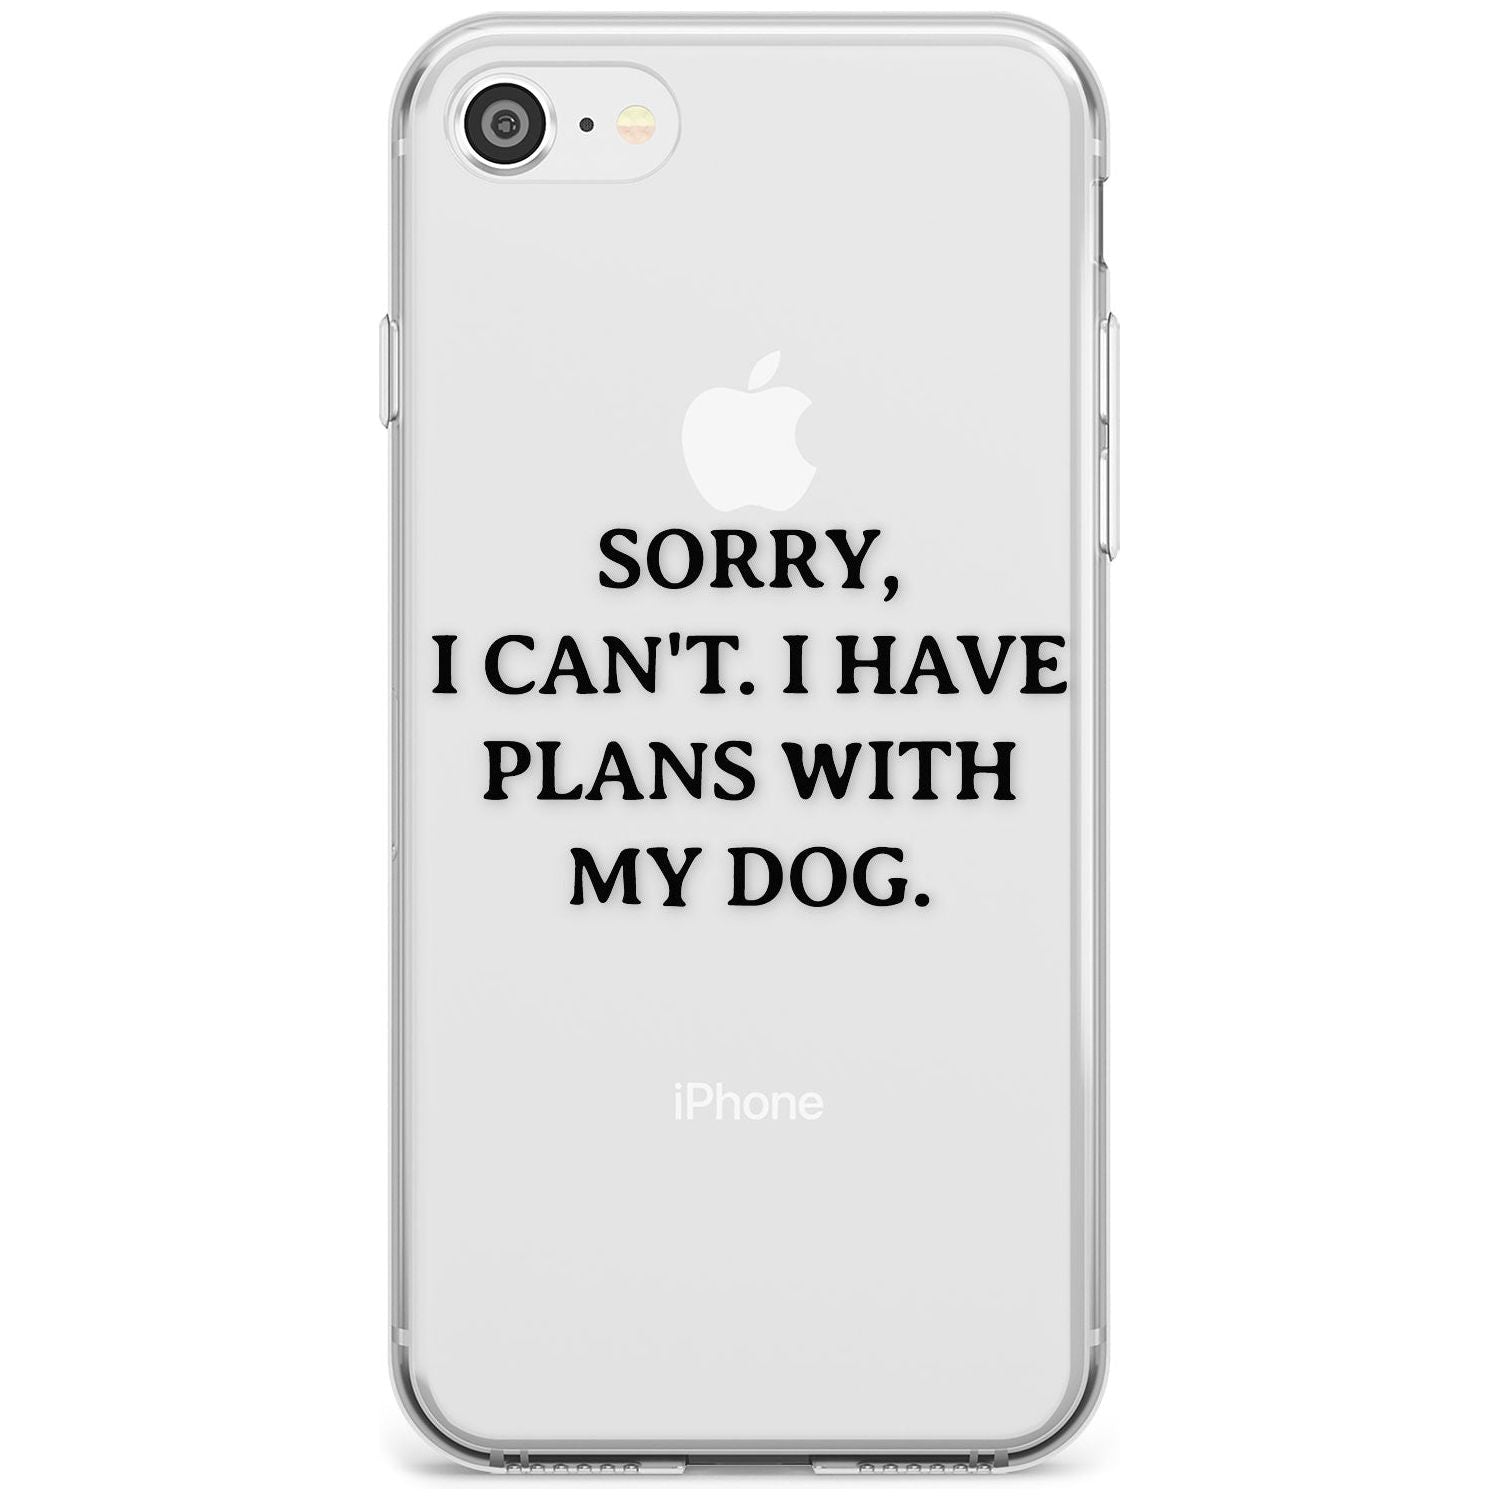 Plans with Dog Slim TPU Phone Case for iPhone SE 8 7 Plus